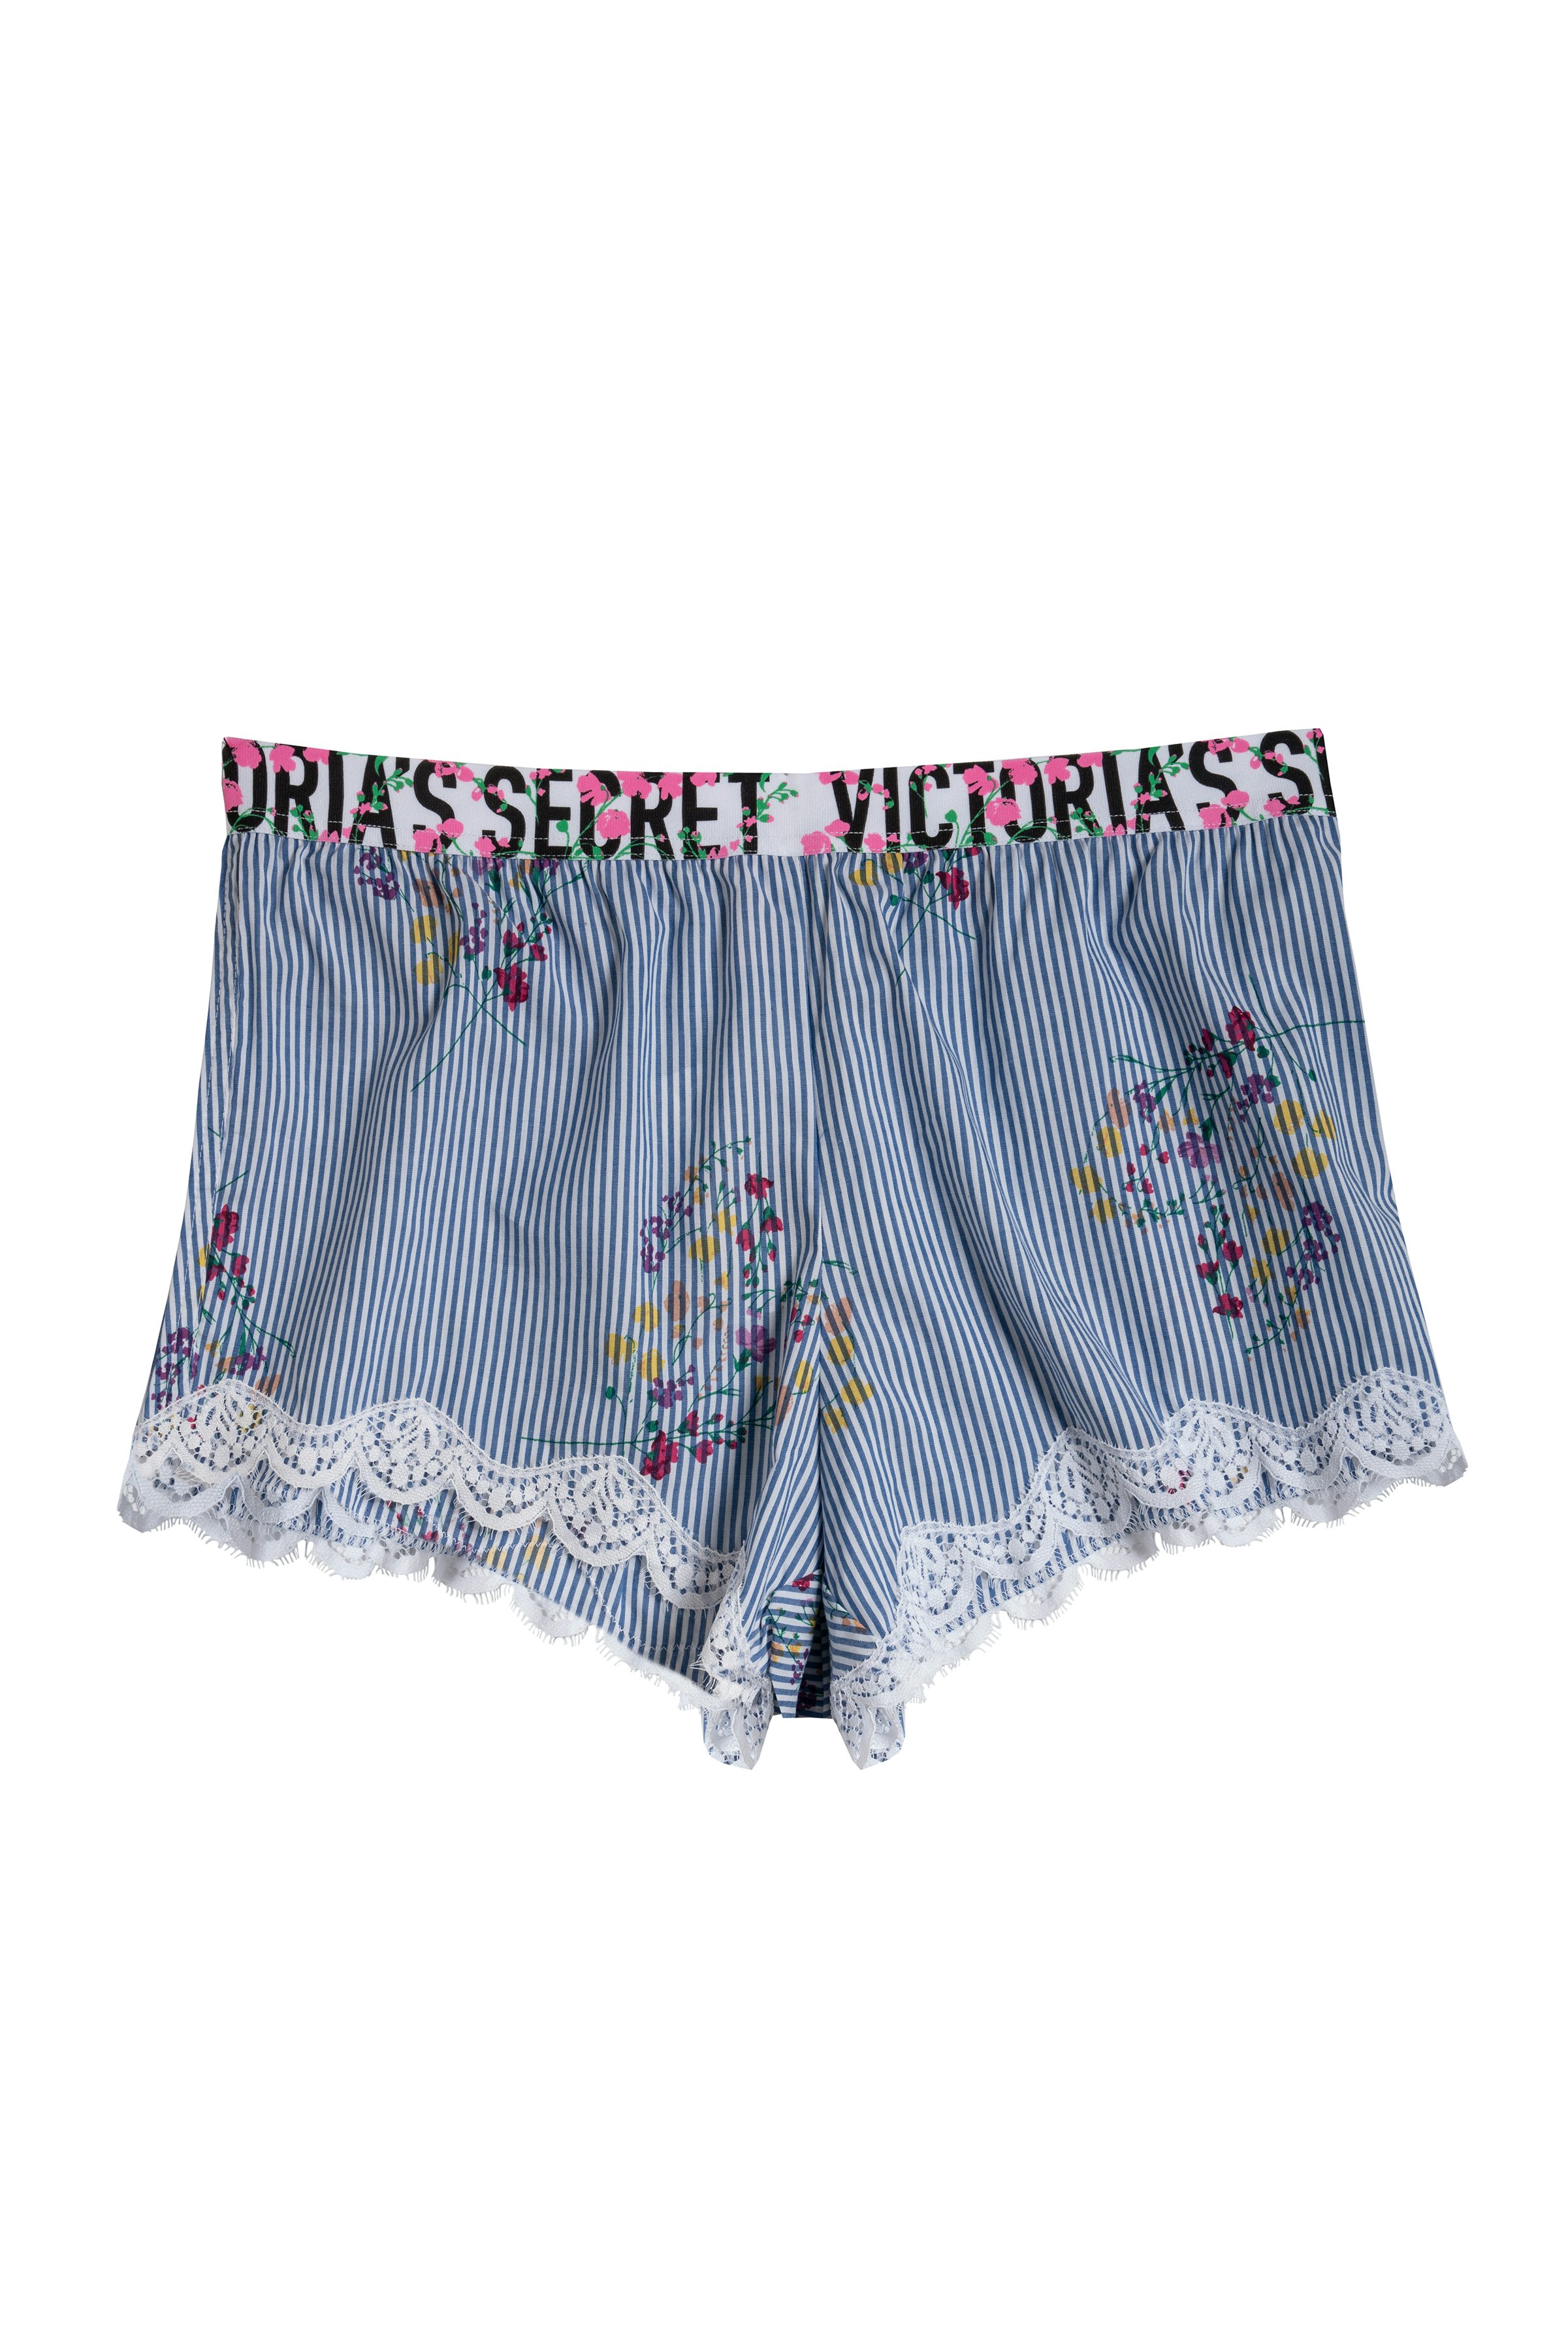 Victoria's Secret's Spring Collection Features French Lingerie